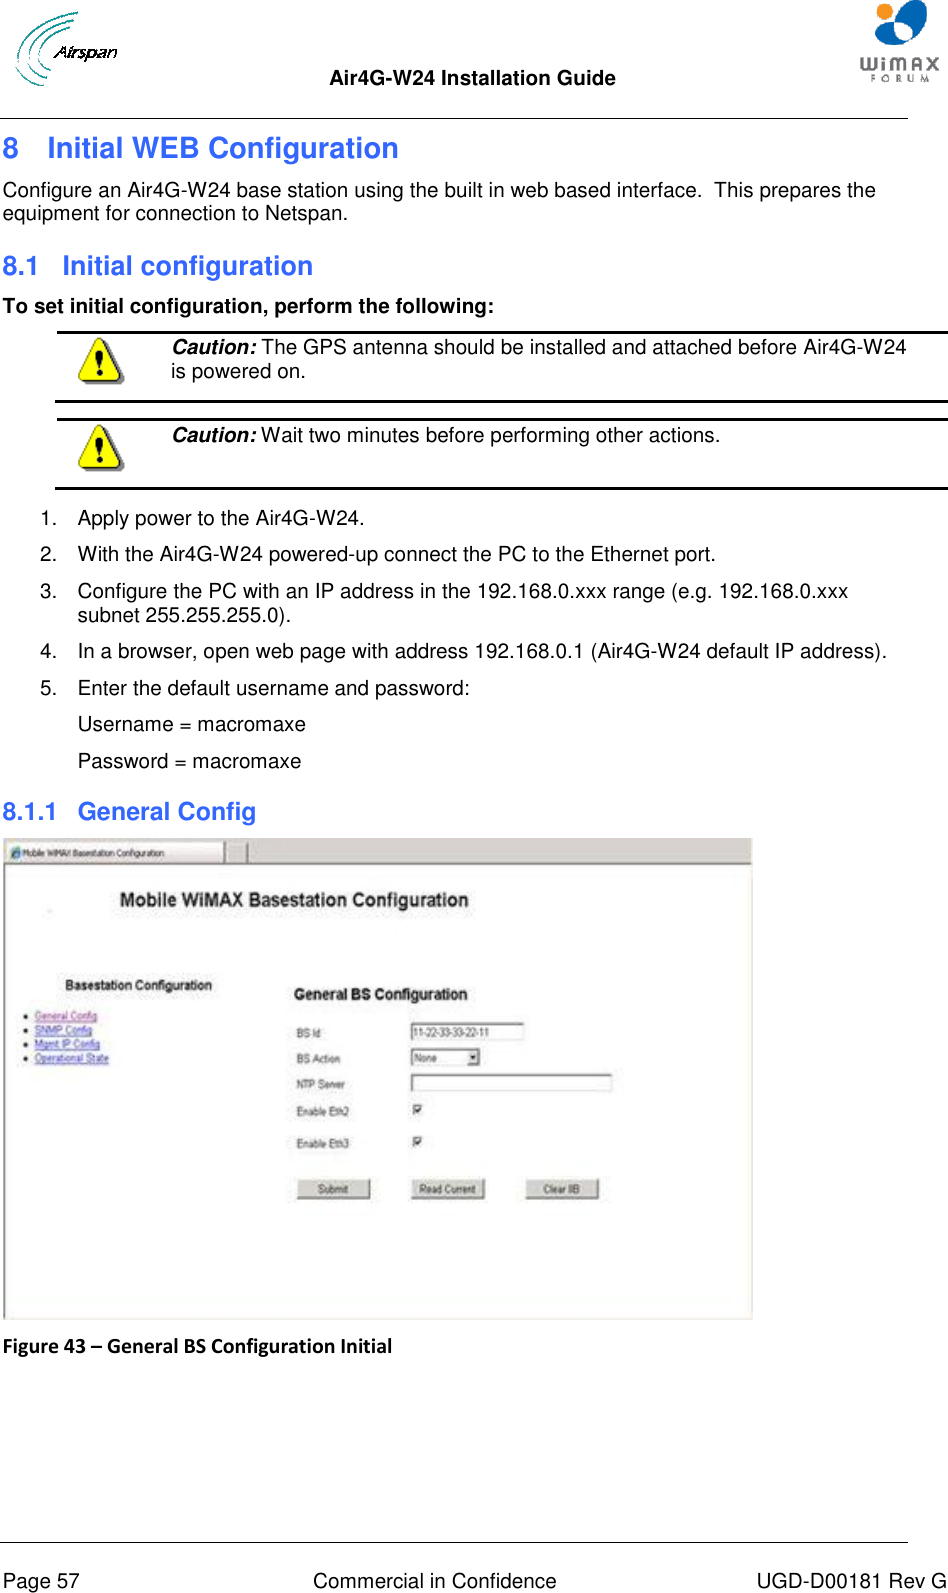  Air4G-W24 Installation Guide       Page 57  Commercial in Confidence  UGD-D00181 Rev G 8  Initial WEB Configuration Configure an Air4G-W24 base station using the built in web based interface.  This prepares the equipment for connection to Netspan. 8.1  Initial configuration To set initial configuration, perform the following:  Caution: The GPS antenna should be installed and attached before Air4G-W24 is powered on.   Caution: Wait two minutes before performing other actions.  1.  Apply power to the Air4G-W24. 2.  With the Air4G-W24 powered-up connect the PC to the Ethernet port. 3.  Configure the PC with an IP address in the 192.168.0.xxx range (e.g. 192.168.0.xxx subnet 255.255.255.0). 4.  In a browser, open web page with address 192.168.0.1 (Air4G-W24 default IP address). 5.  Enter the default username and password: Username = macromaxe Password = macromaxe 8.1.1  General Config  Figure 43 – General BS Configuration Initial  